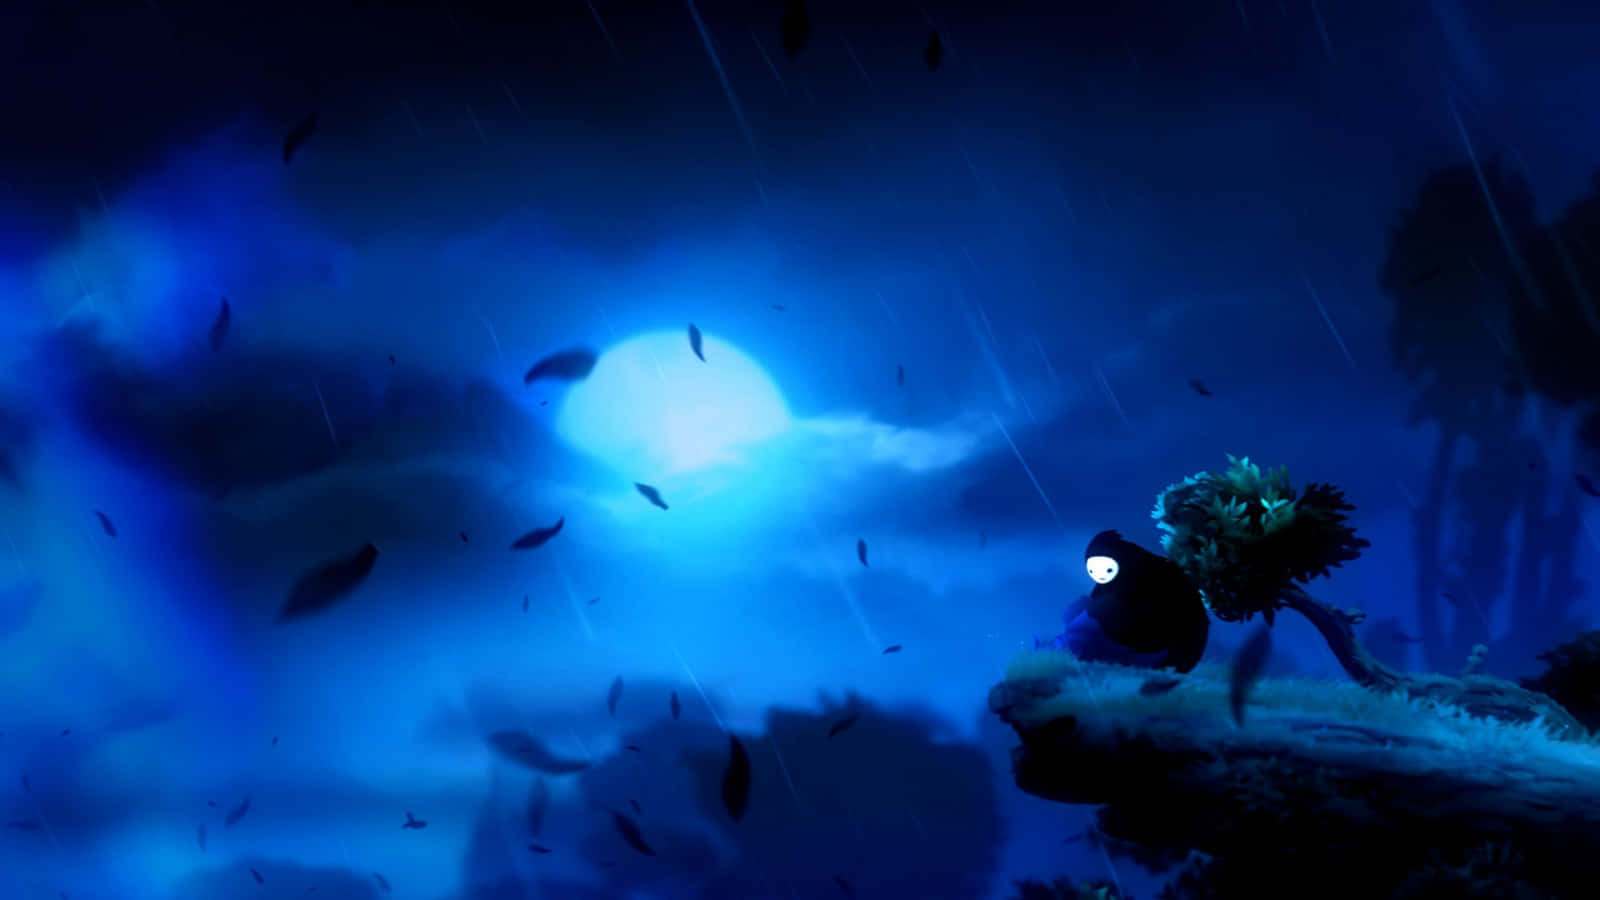 Cool Ori And The Blind Forest Desktop Wallpaper